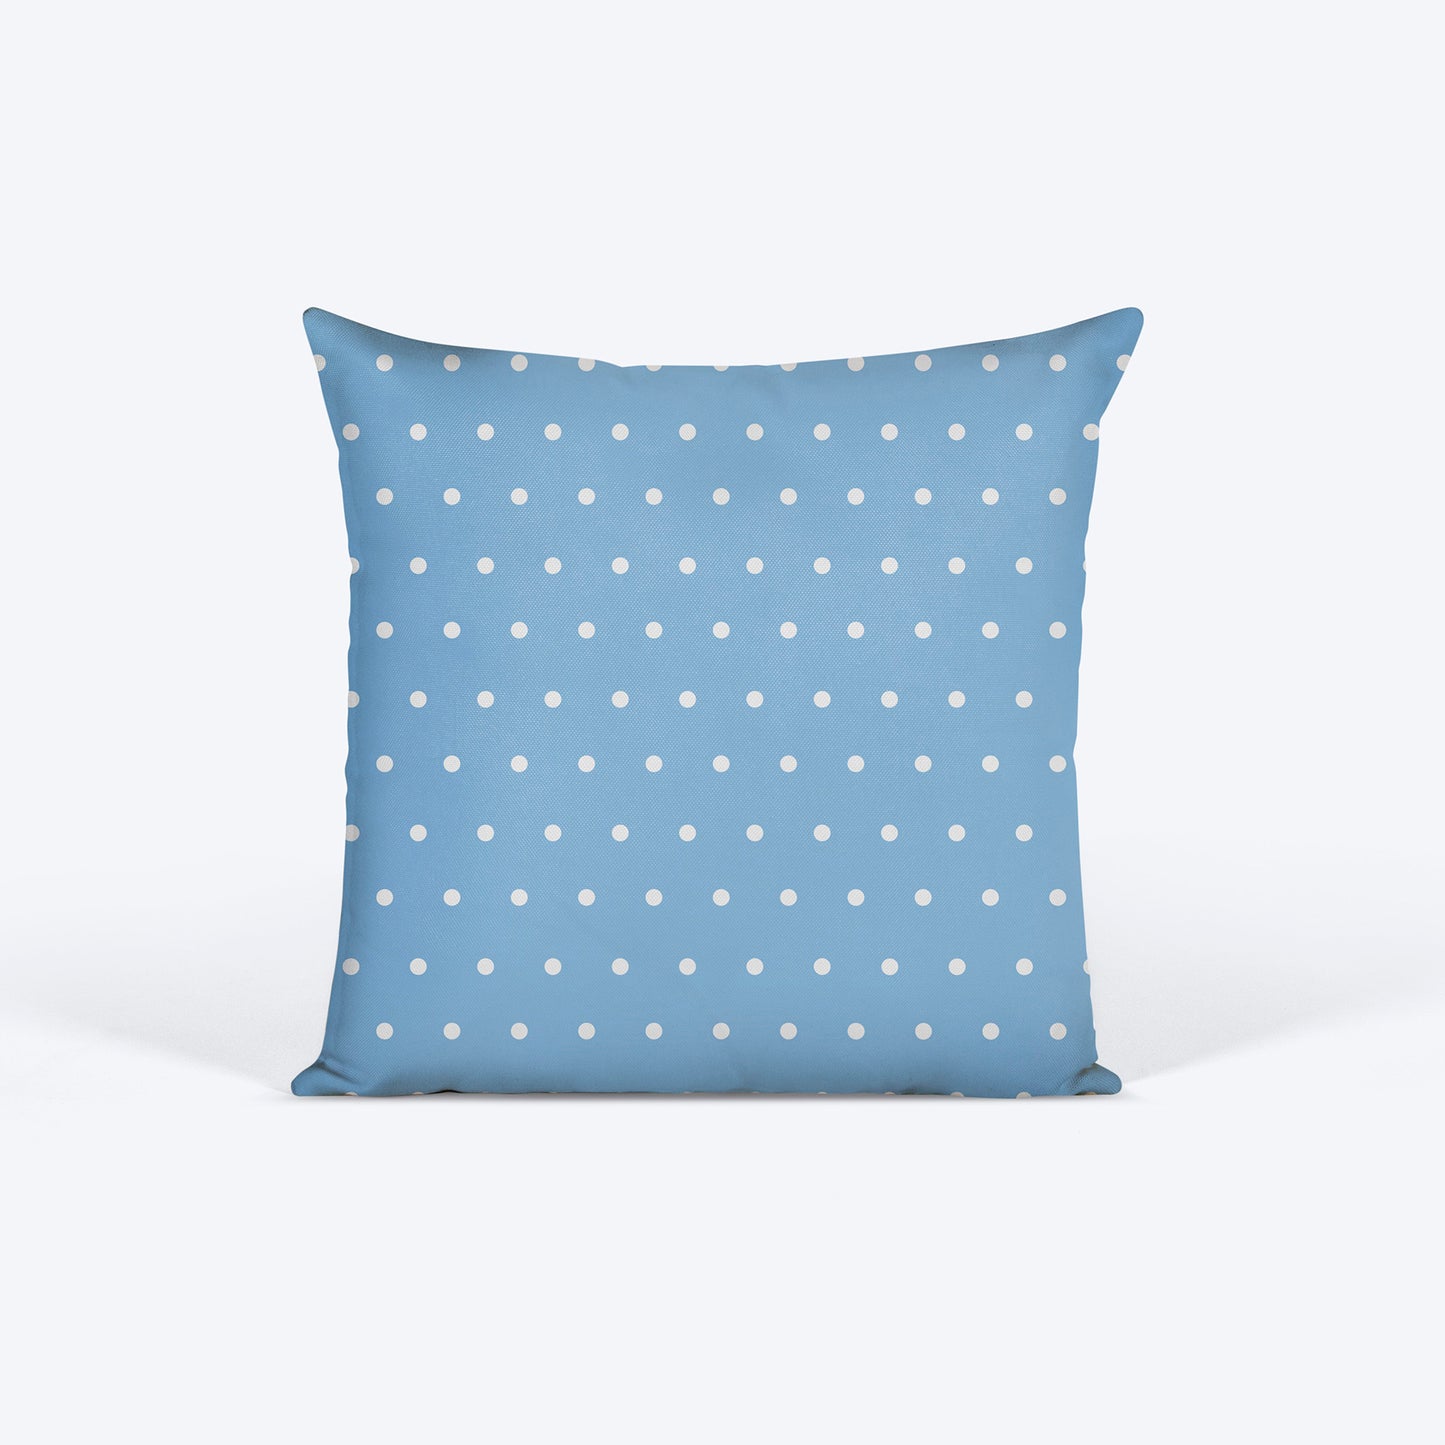 HUFT Blue Polka Dot Personalised Cushion - 12 inches (30 x 30 cm) - Heads Up For Tails